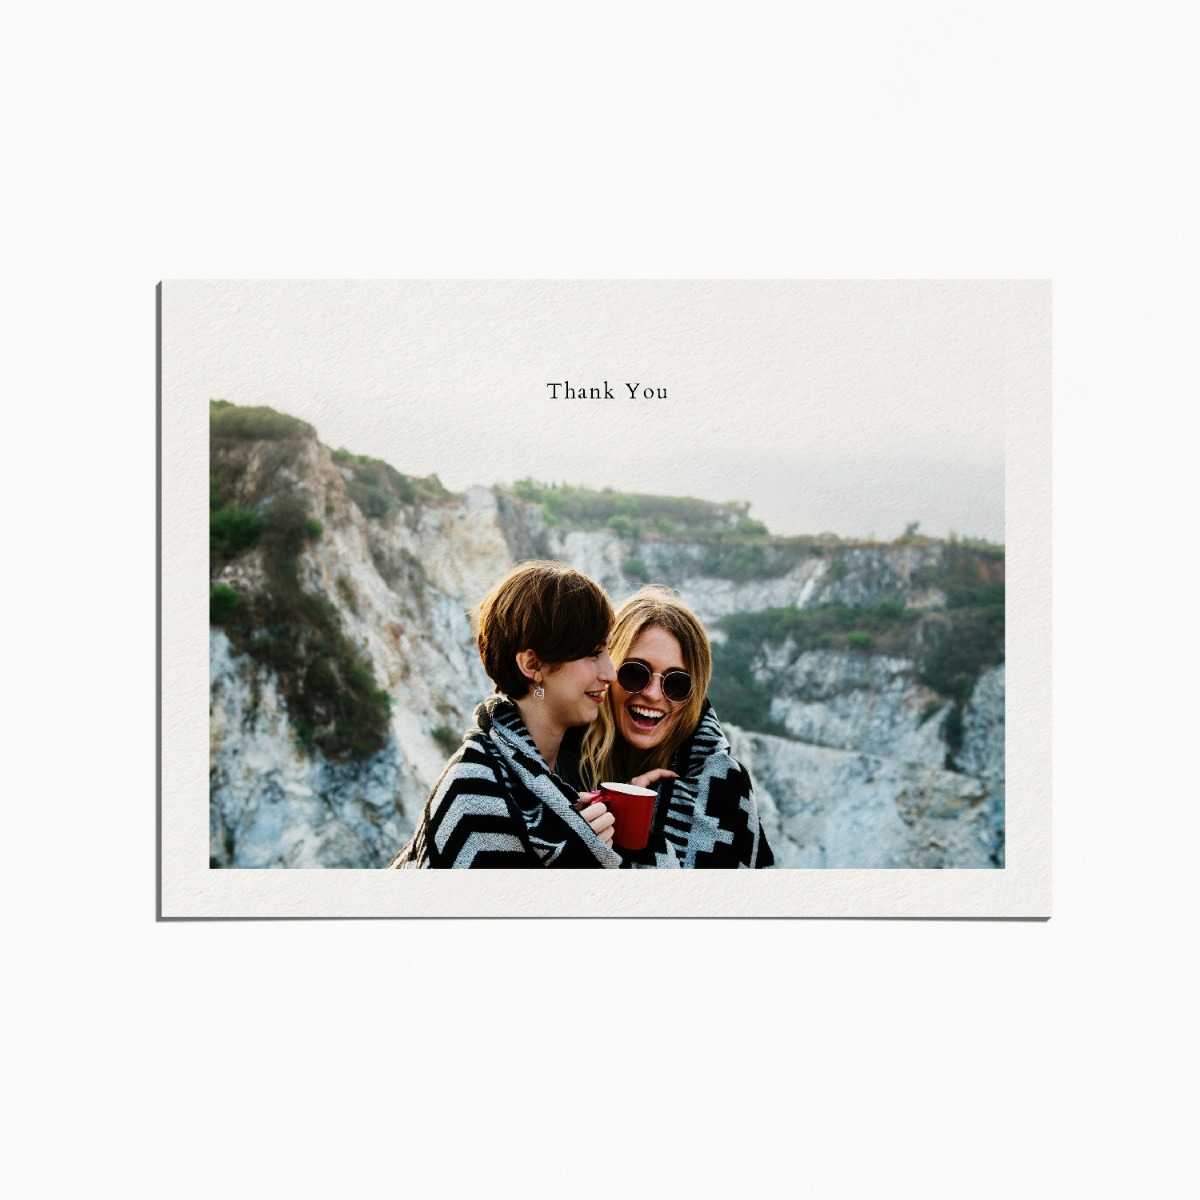 thank you card with an image of a couple embracing on top of a mountain and smiling